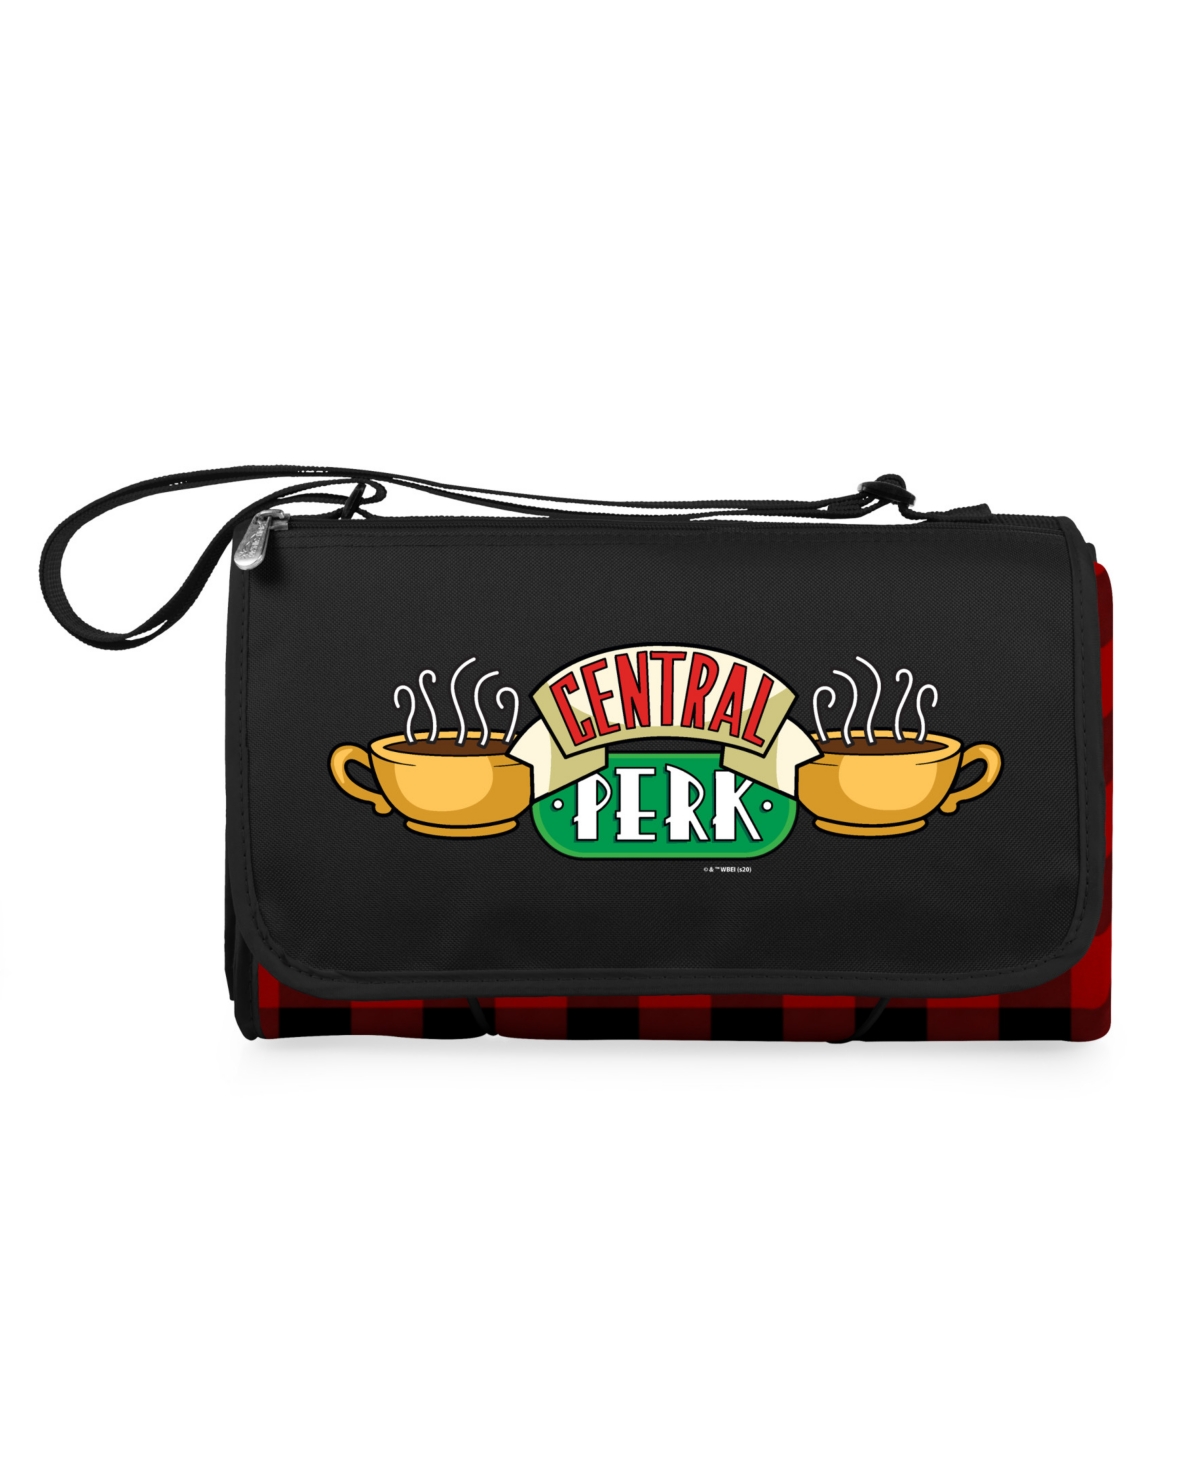 Friends Central Perk Blanket Tote Outdoor Picnic Blanket - Red Black Buffalo Plaid Pattern